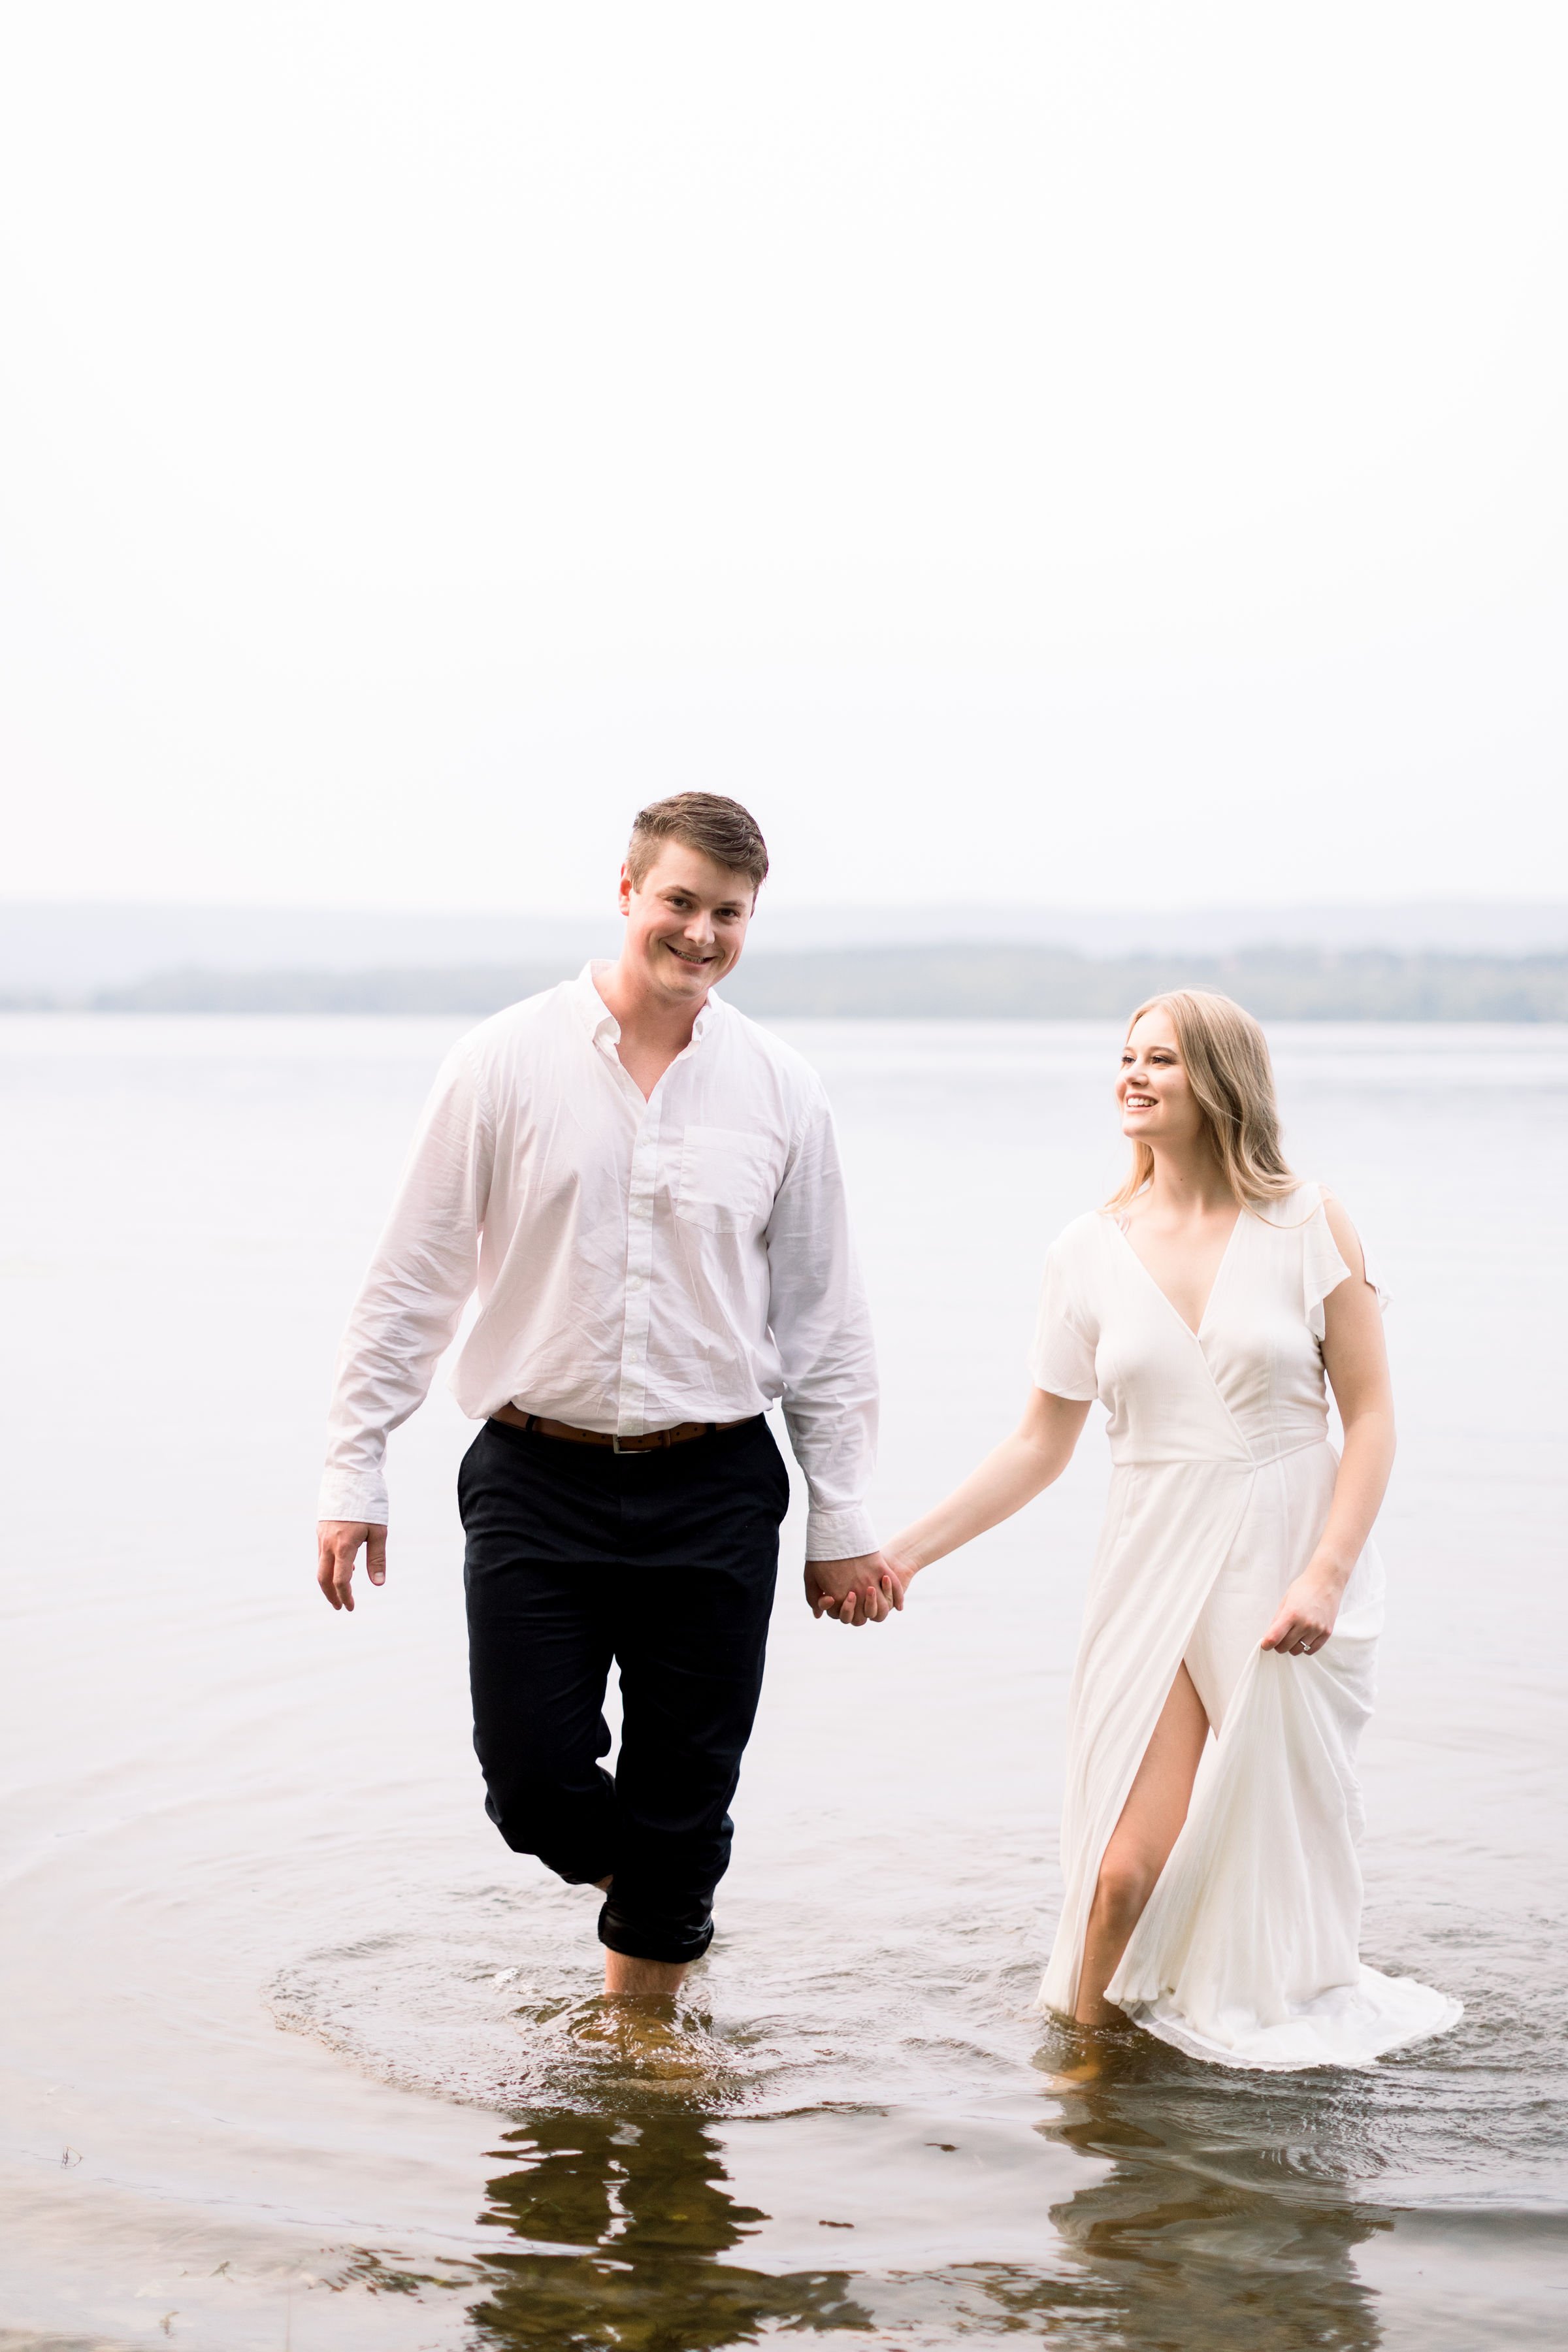  Walking together a man and woman look into one another's eyes by Chelsea Mason Photography. completely in love soon to be married engaged #ChelseaMasonPhotography #ChelseaMasonEngagements #PinheysPointEngagements #OttawaEngagementPhotography 